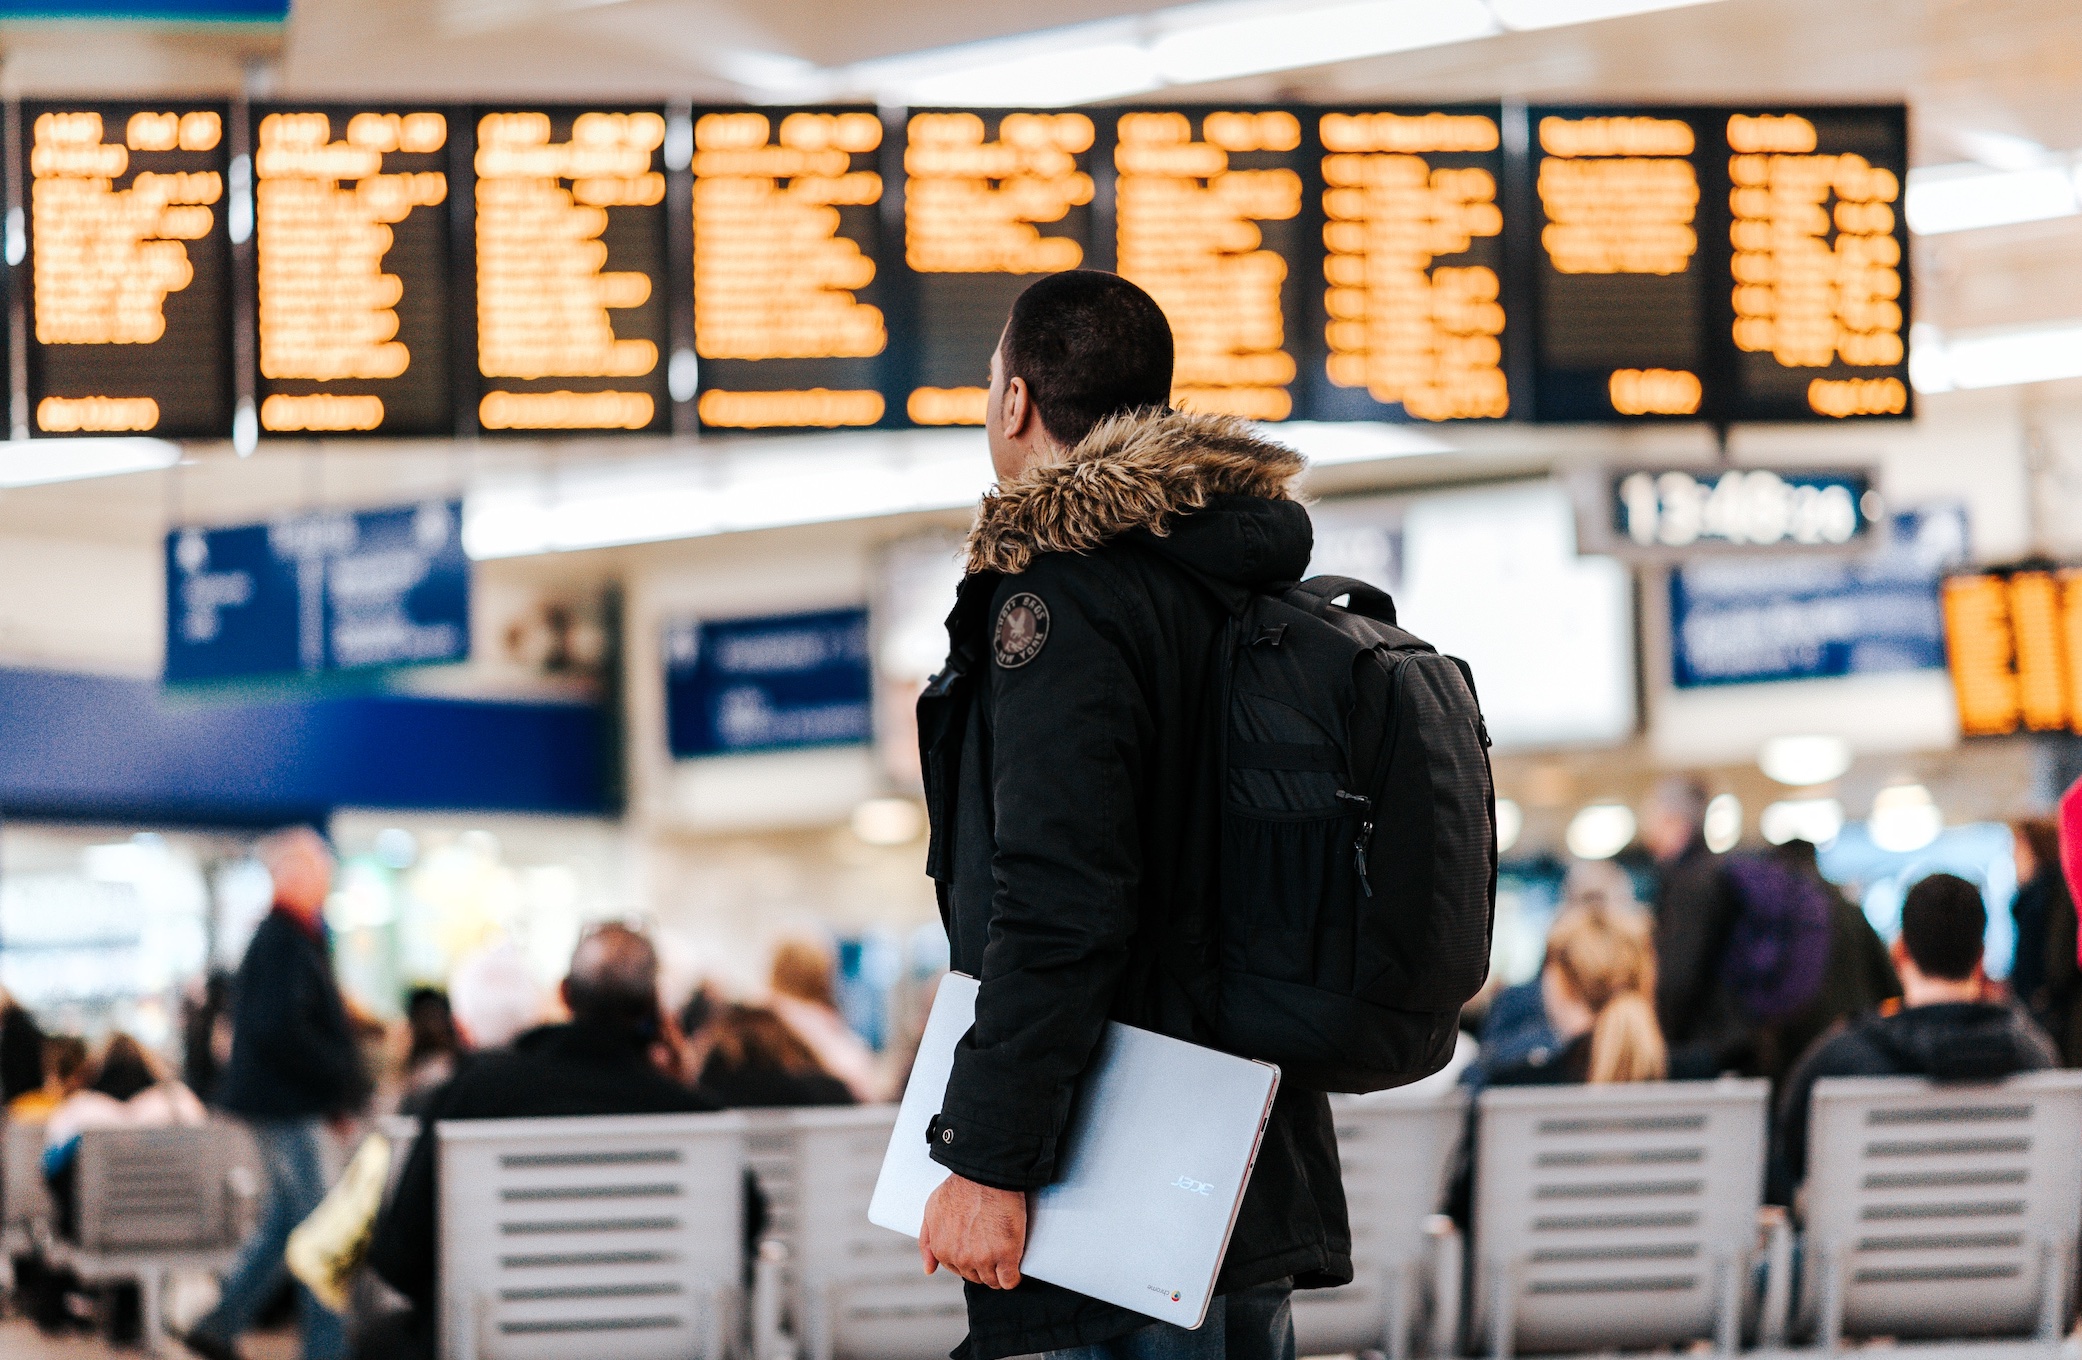 Man in airport looking at flight schedules; image by Anete Lusina, via Unsplash.com.